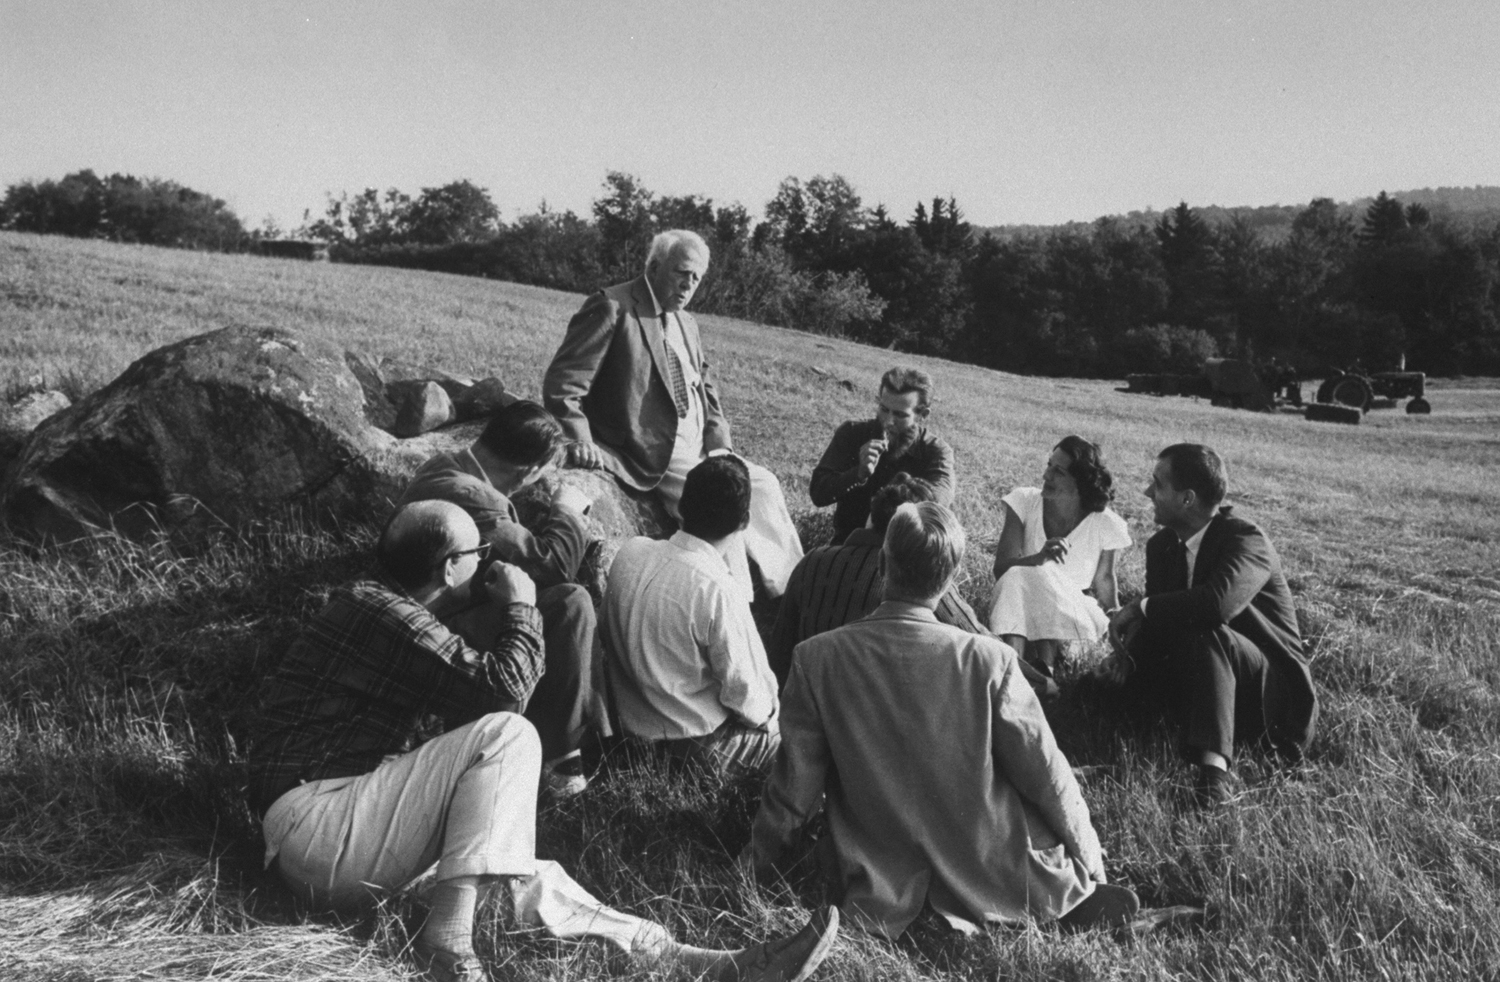 Student authors hear Robert Frost discuss verse at Bread Loaf Writers' Conference near Middlebury, Vt., the oldest summer writers' workshop.